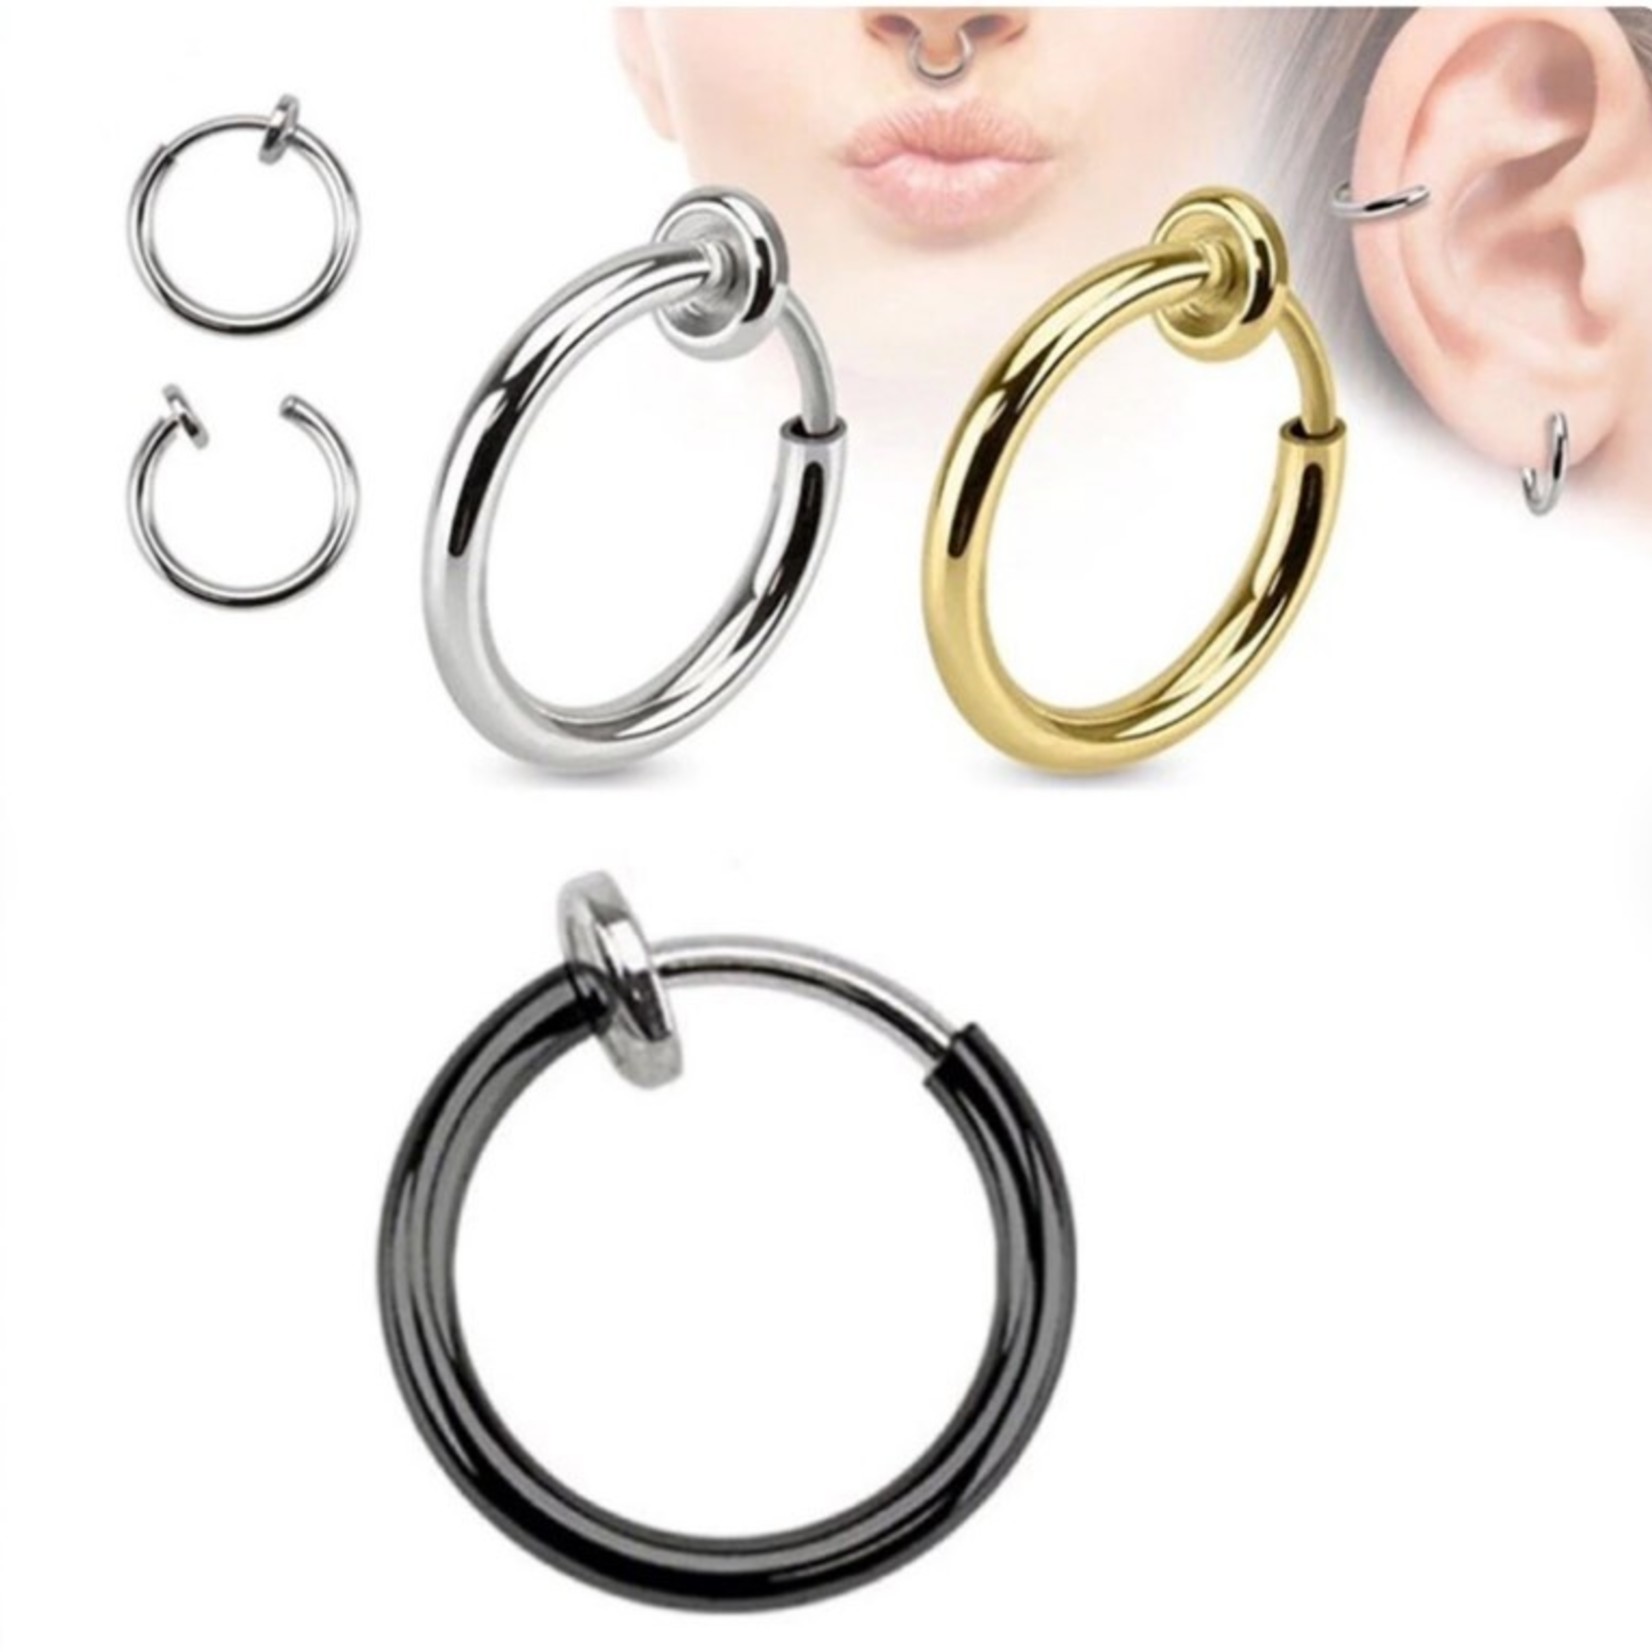 Hollywood Body Jewelry Spring Action Hoop